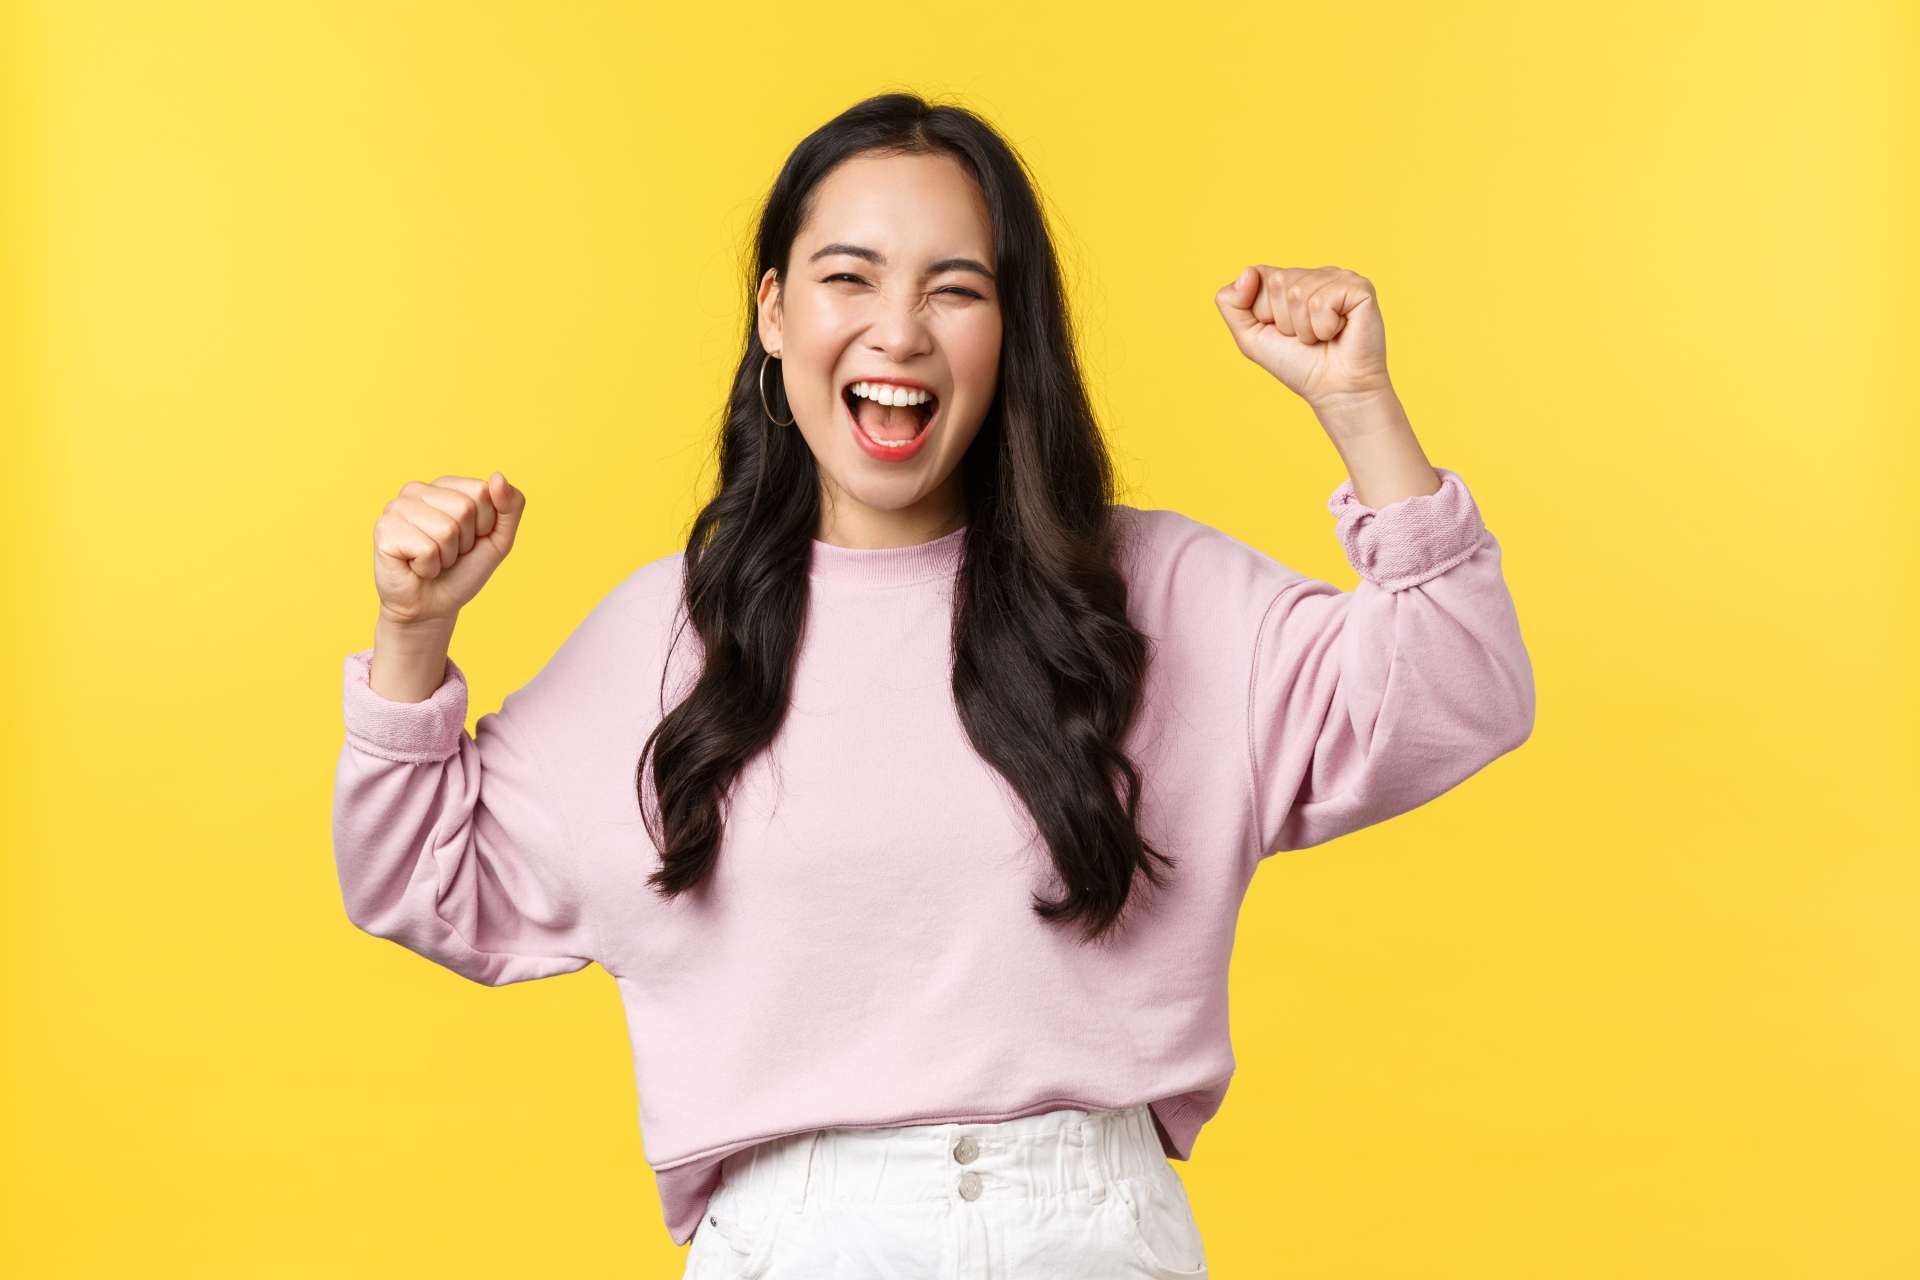 lifestyle-emotions-and-advertisement-concept-happy-smiling-and-pumped-asian-girl-celebrating-victory-chanting-yes-with-hands-raised-up-and-broad-grin-triumphing-over-achievement-or-success.jpg